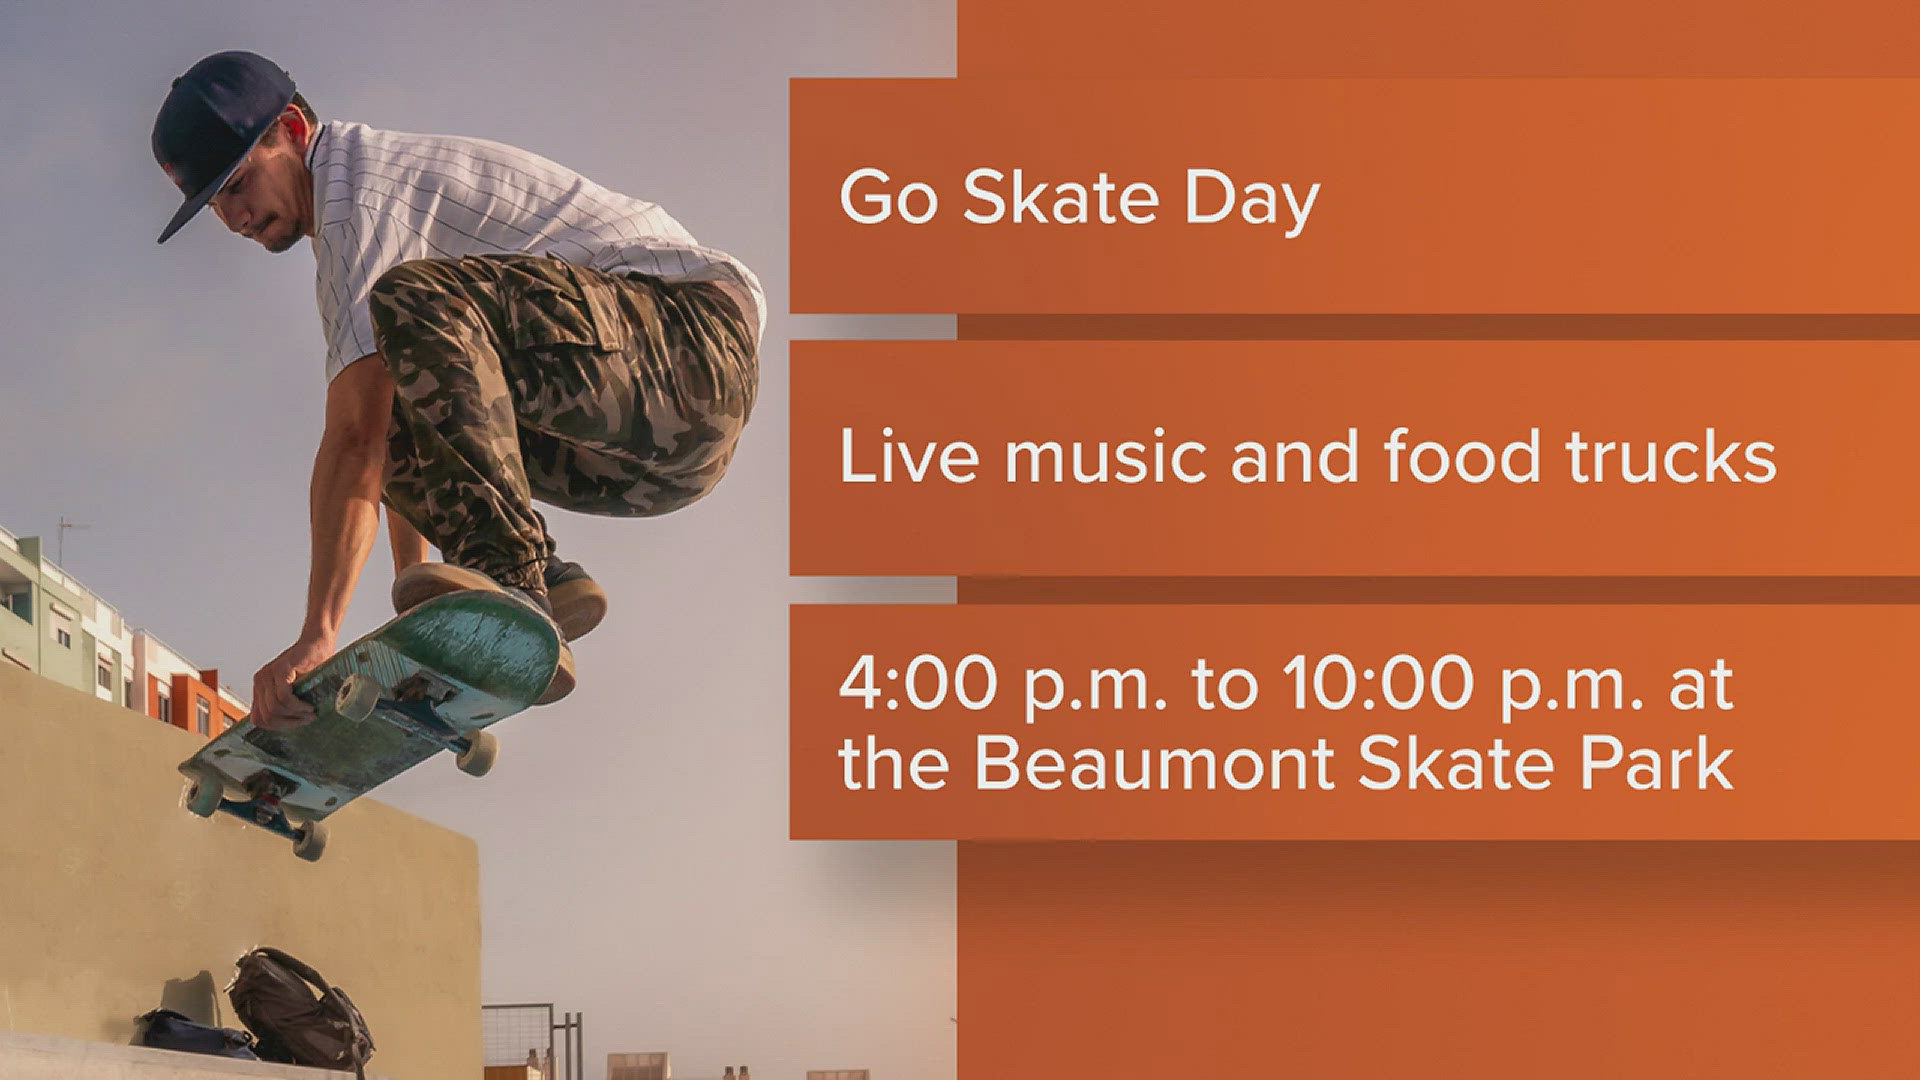 Go Skate Day is a nationwide celebration that encourages skateboarding and healthy activity.